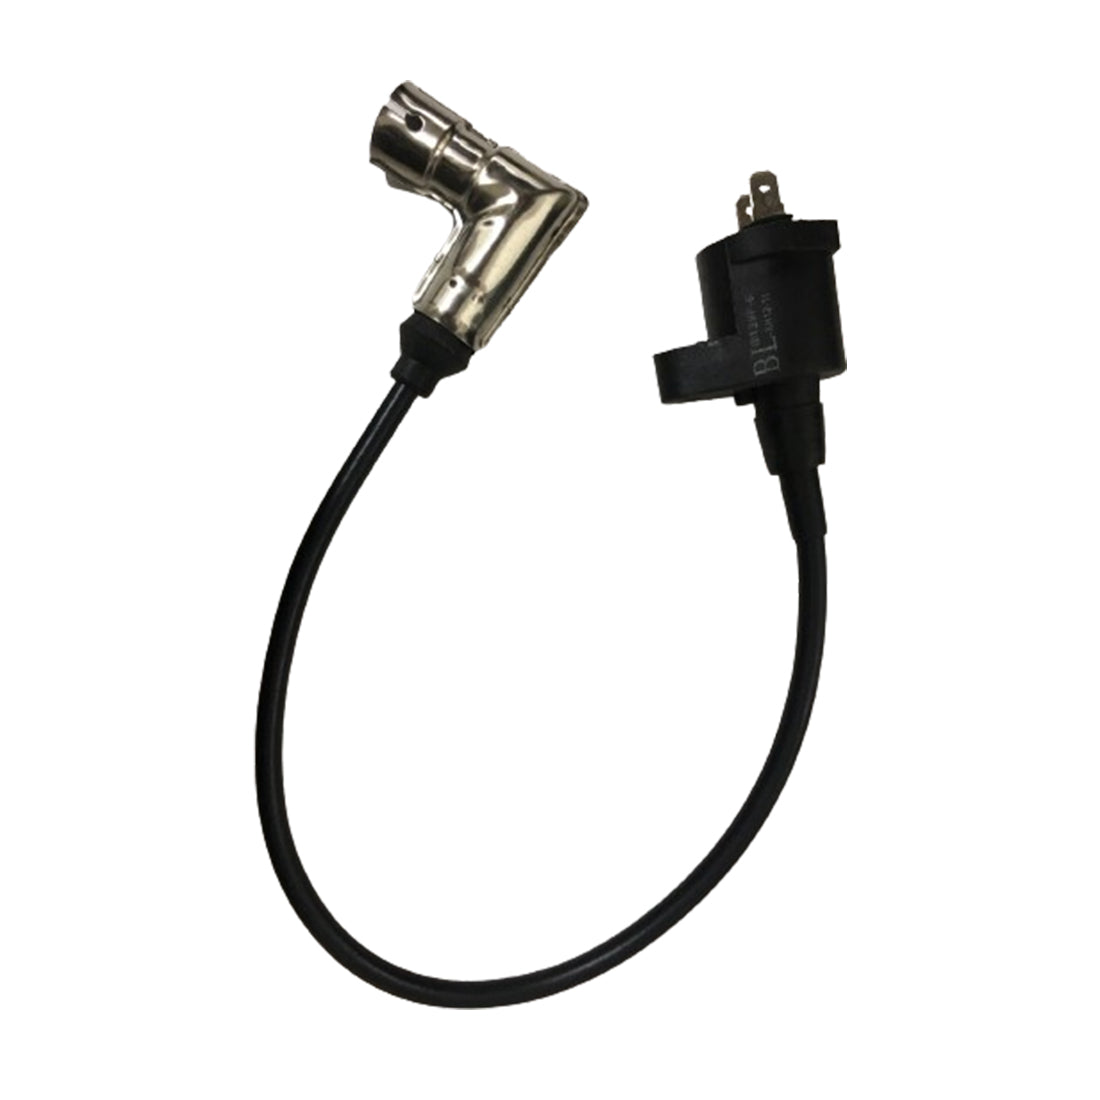 Ignition Coil For Gentrax 800w Generator